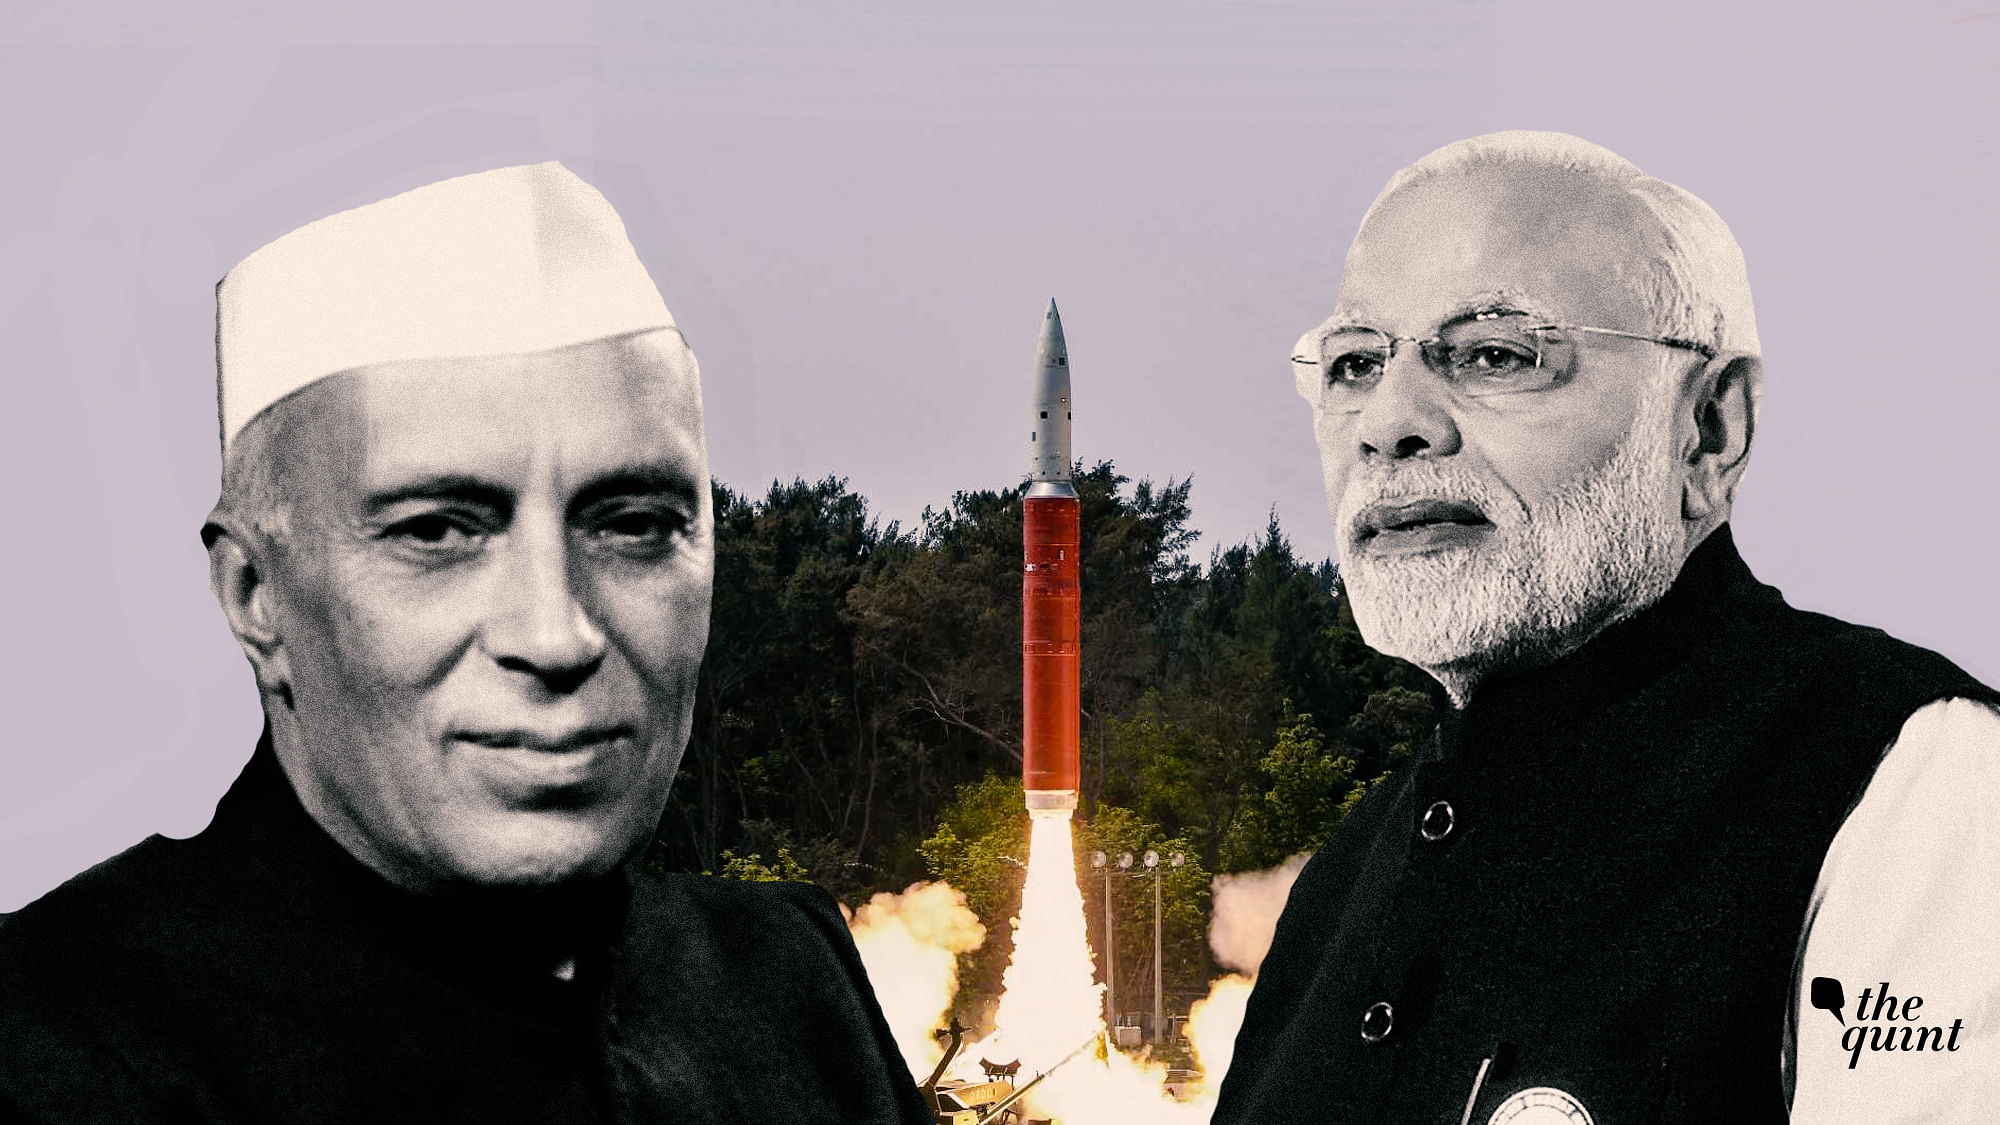 Despite the success of Mission Shakti under Modi, it could never have happened without successive Indian governments dating back to Jawaharlal Nehru dedicated investments in the Indian space programme.